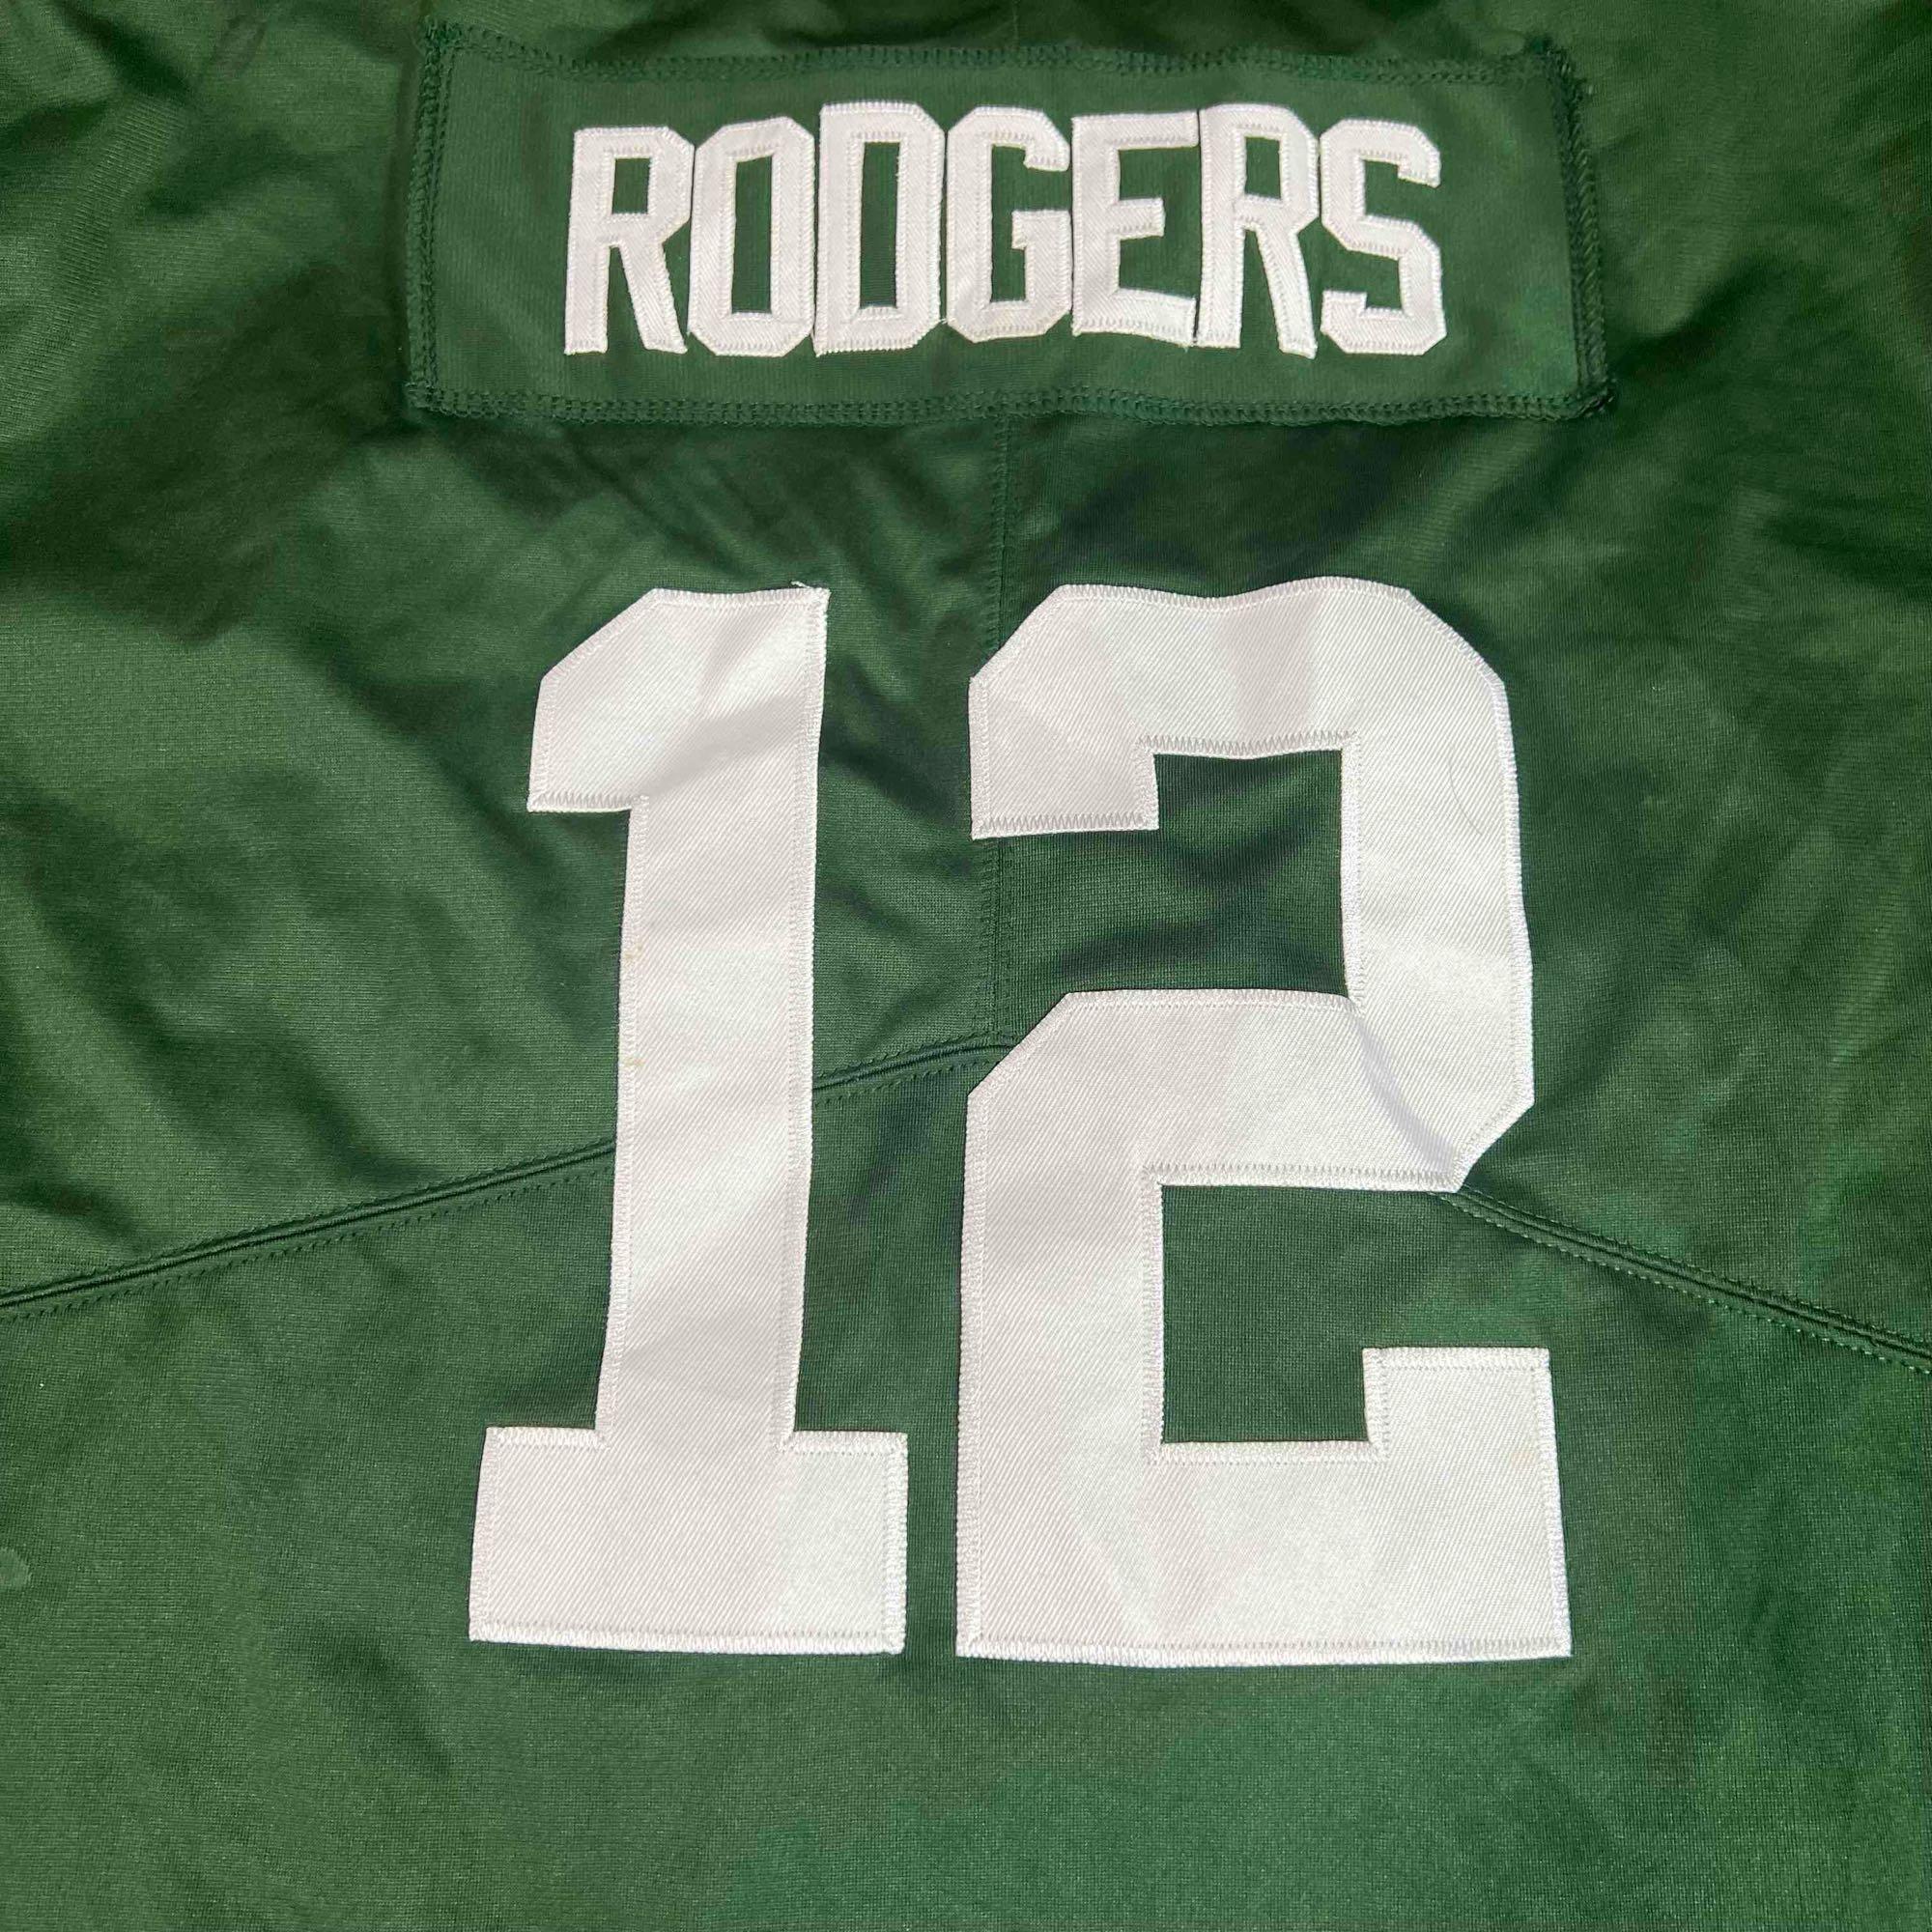 Nike Aaron Rodgers Green bay packers jersey nwt size large